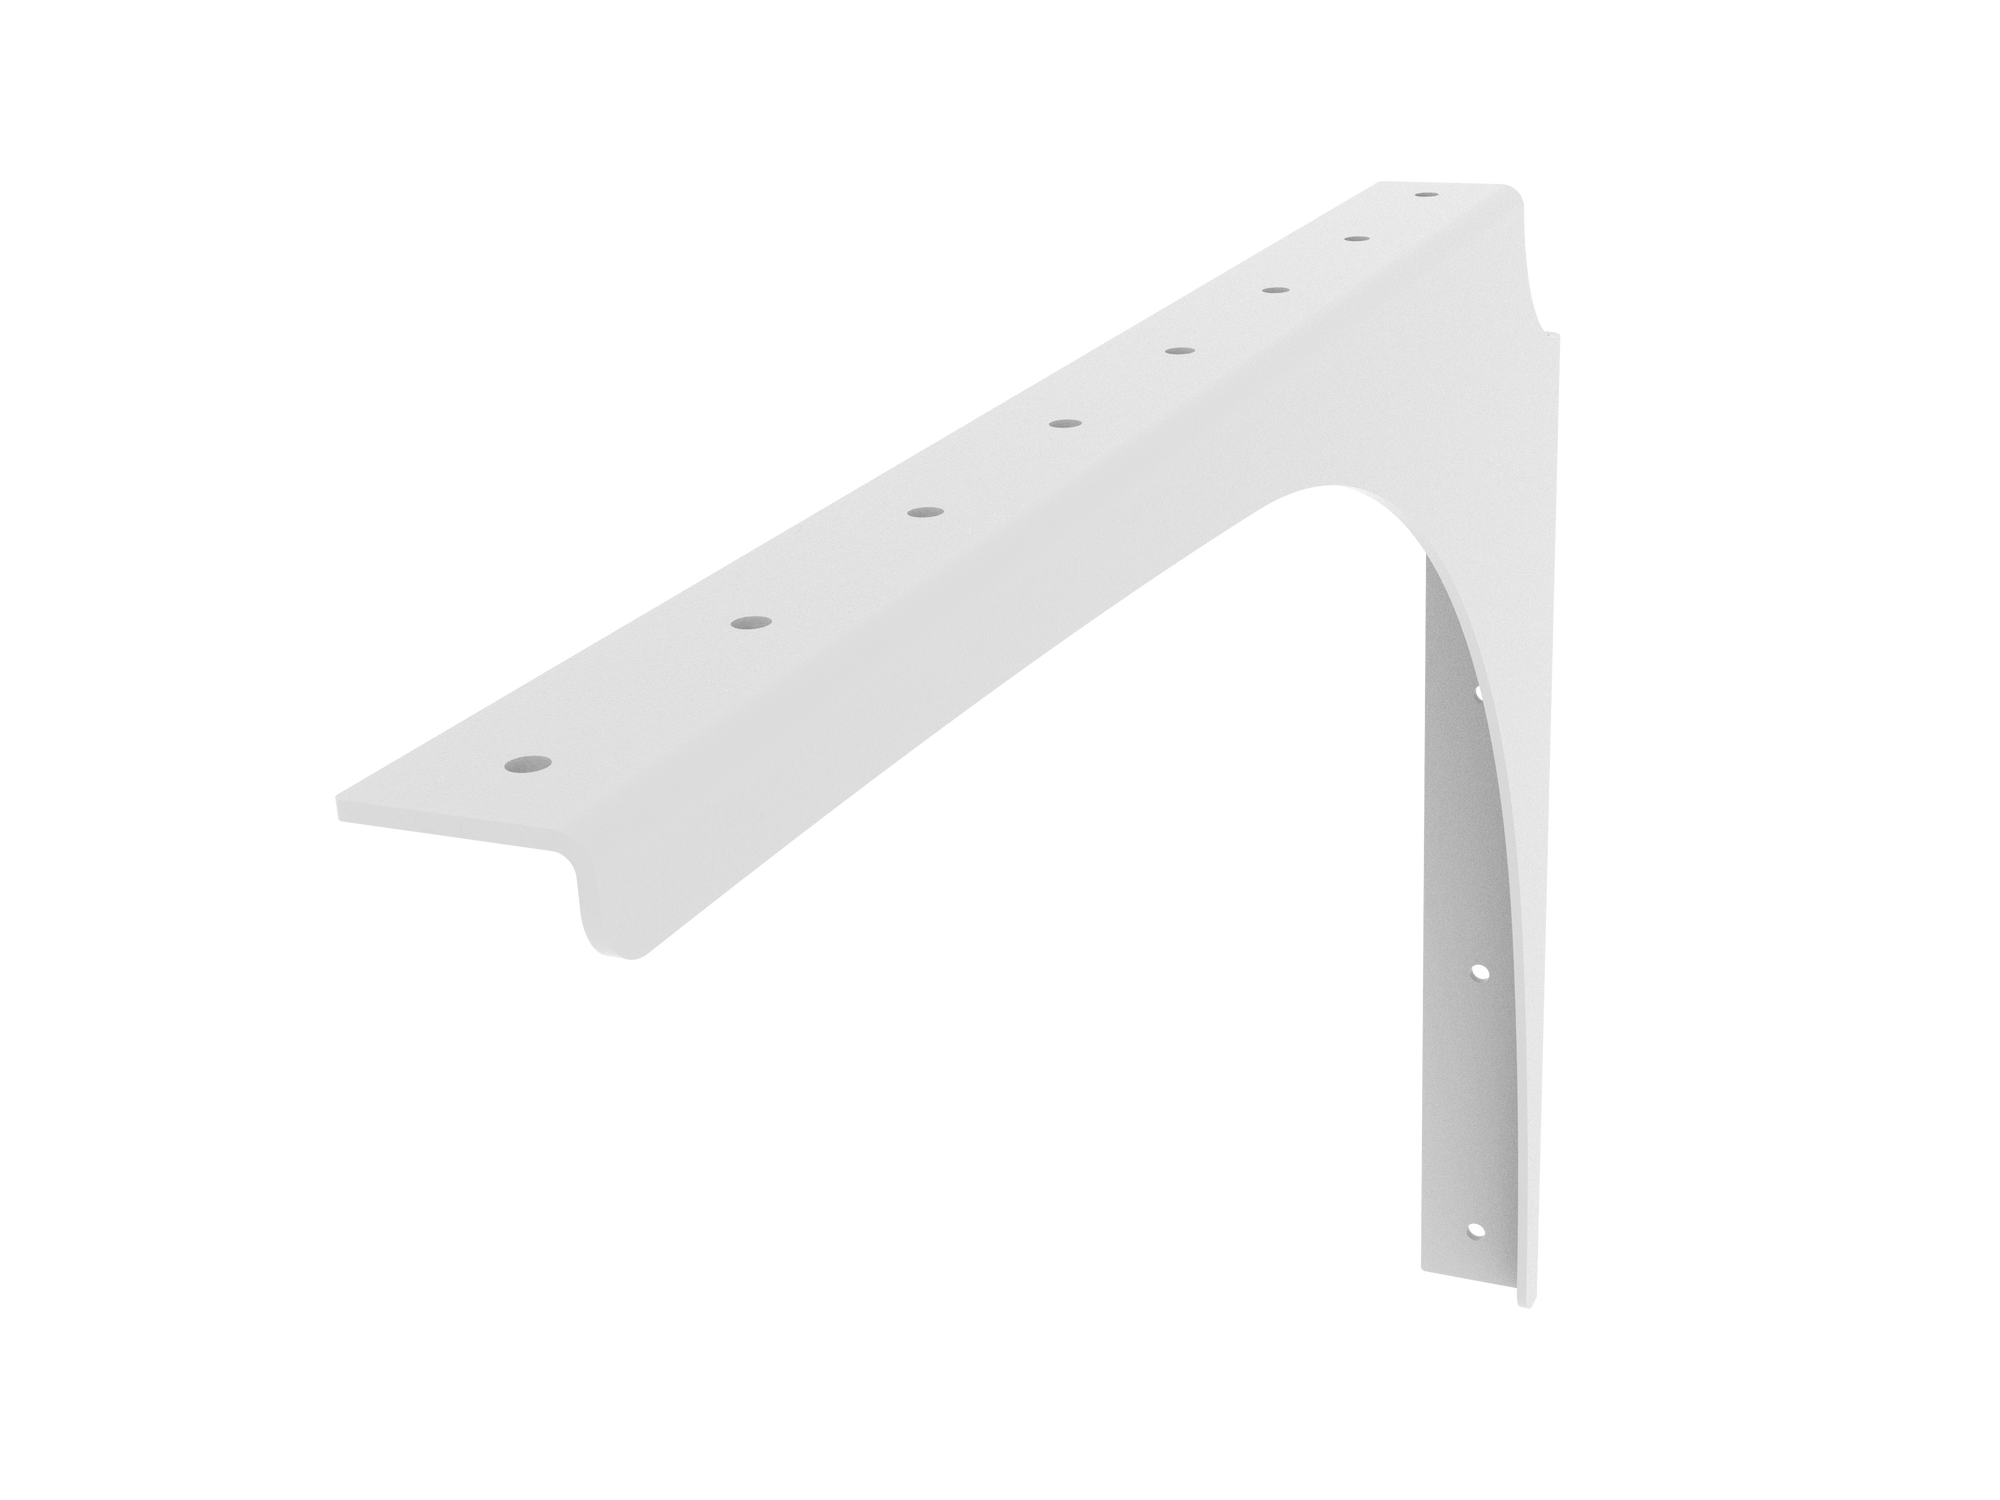 Universal Commercial Support Bracket - 21" x 12" Right Handed with White Powder Coat Finish. Supports floating ADA-compliant vanities, desks, shelving, countertops, and more.